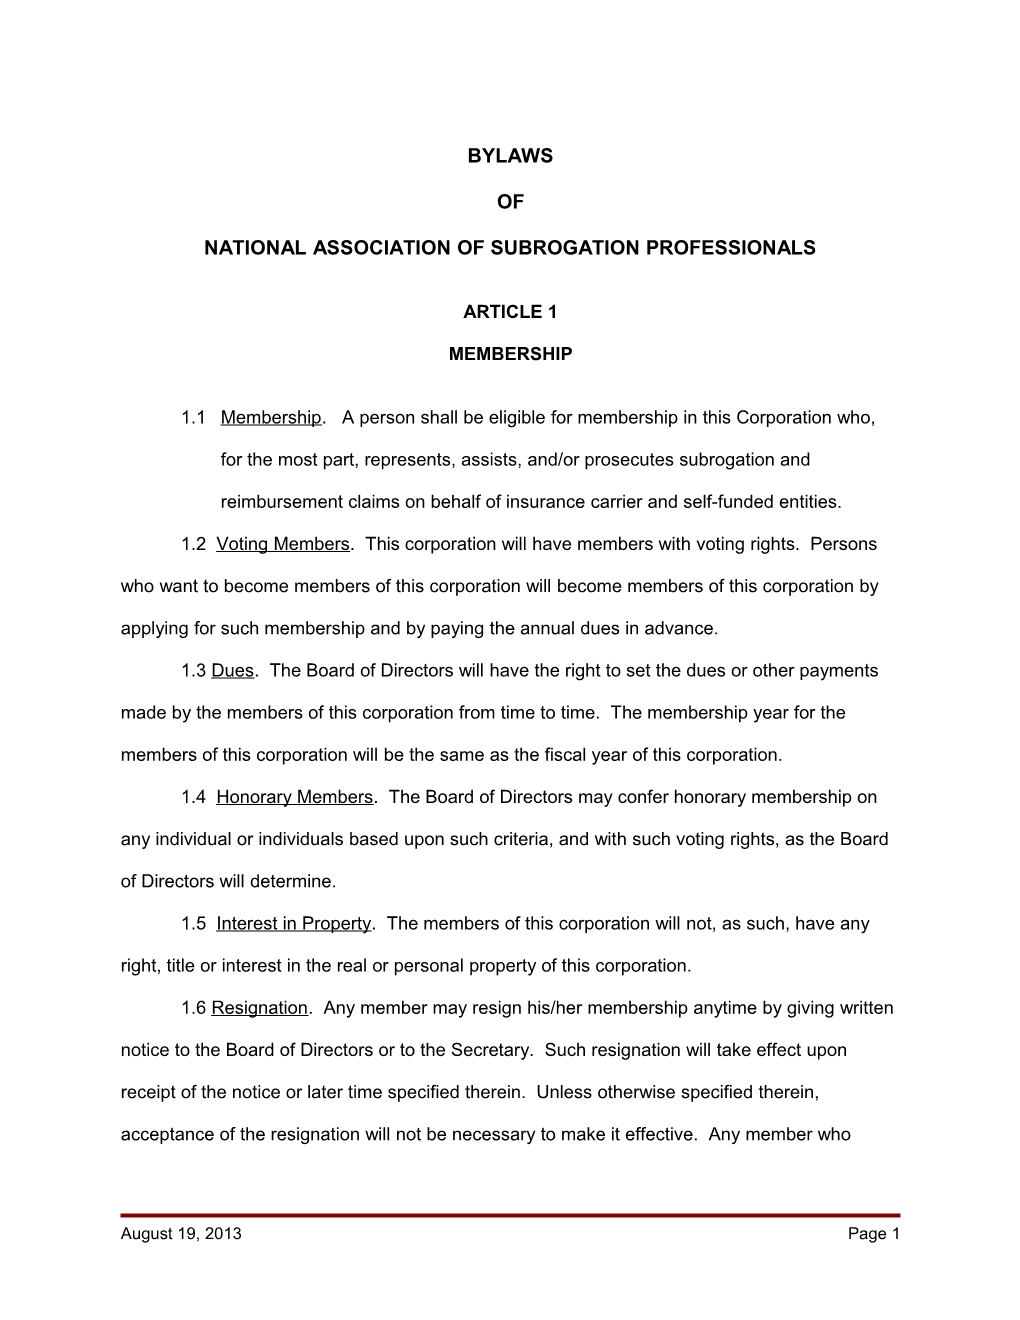 Current NASP By-Laws - As Amended Aug 2008 (00012671)